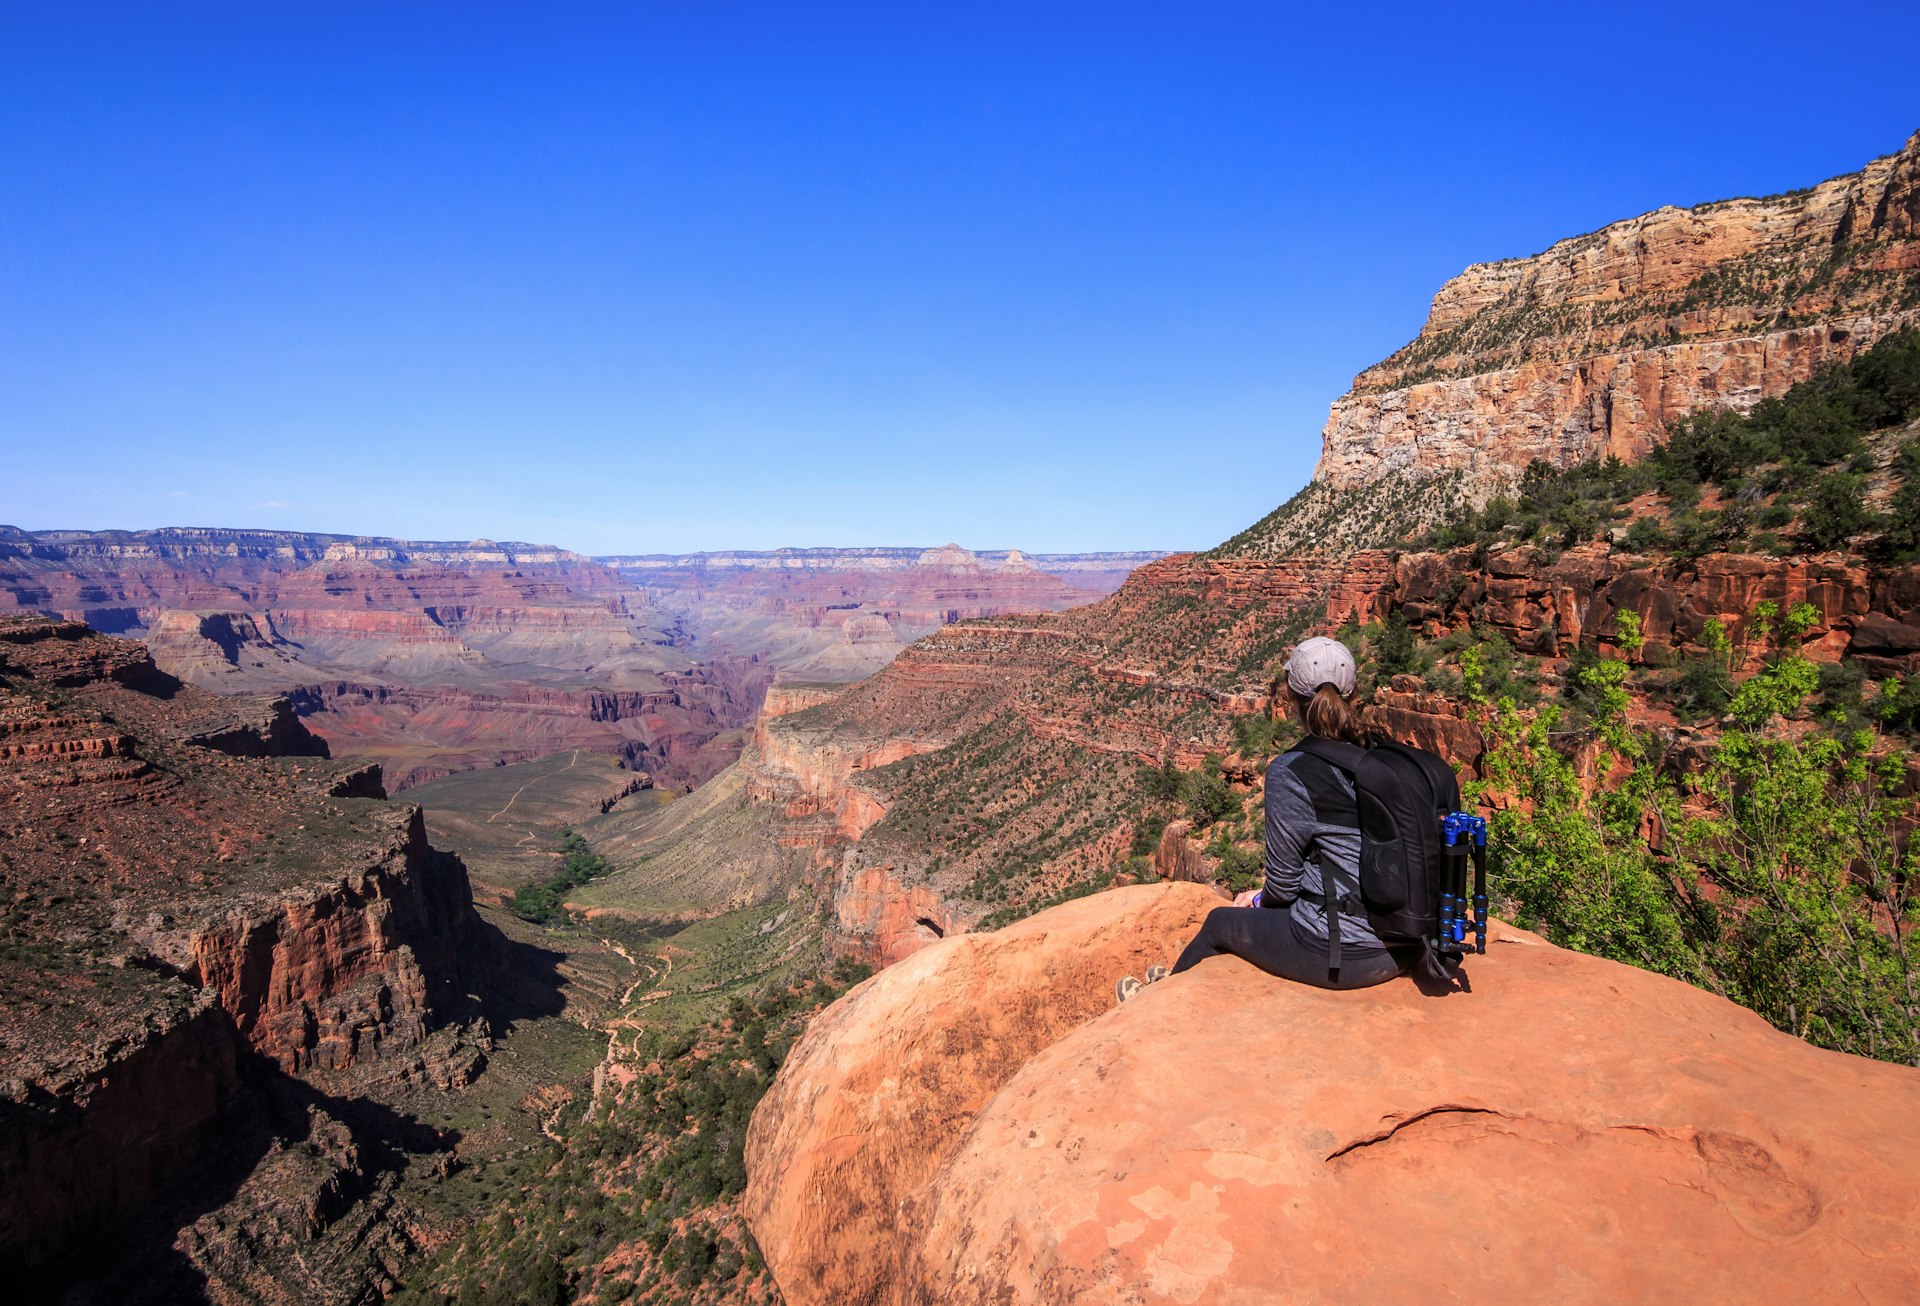 A woman sits on a rock overlooking a deep canyon